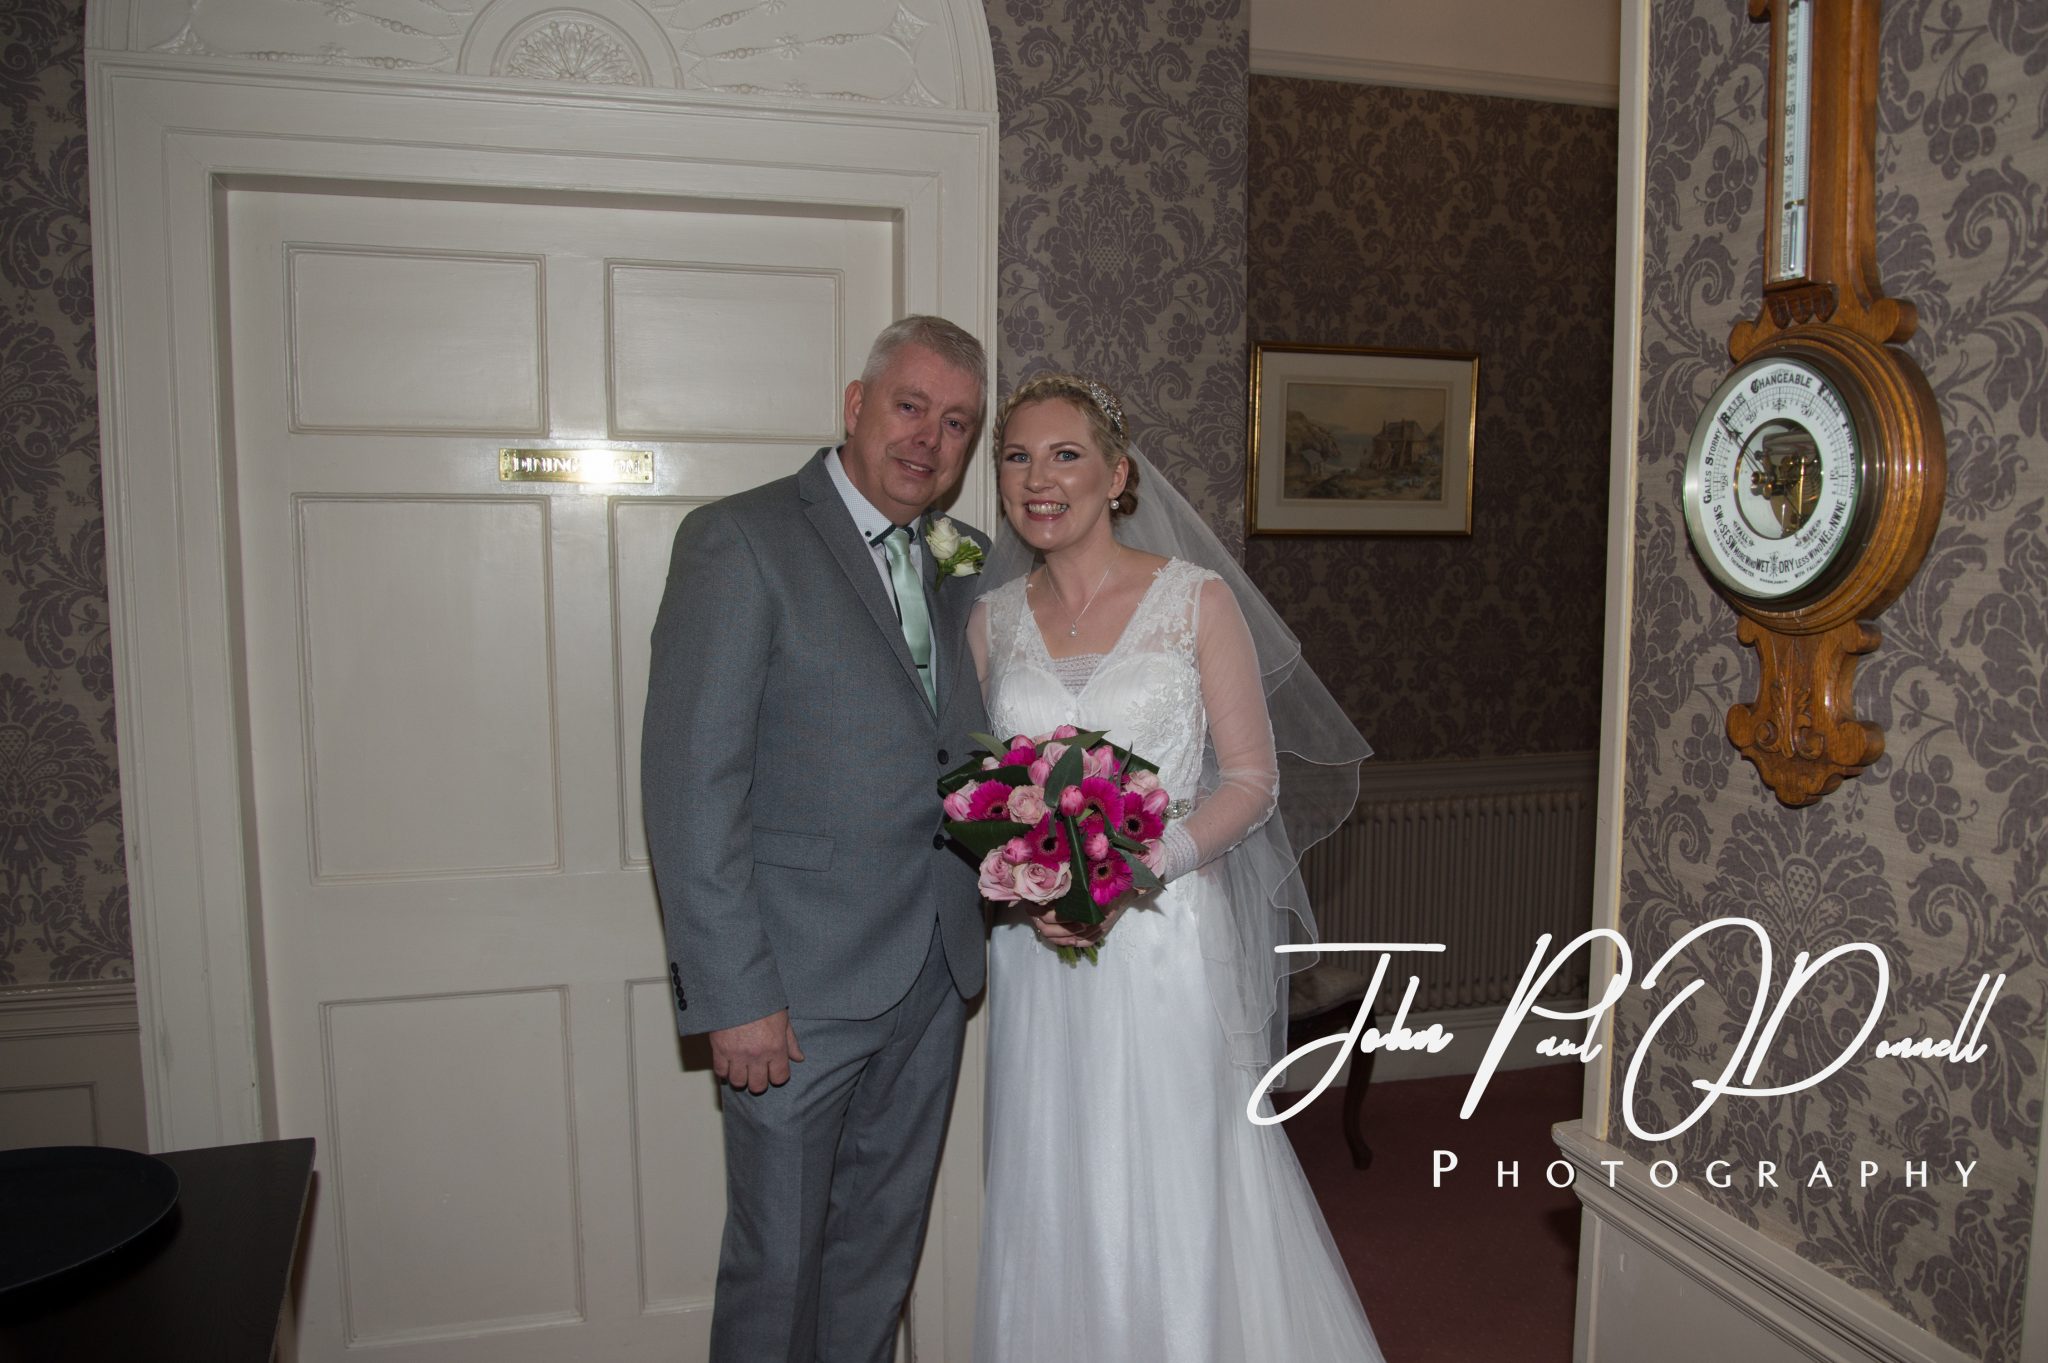 Laura and Daniels Wedding at Mulberry House Essex